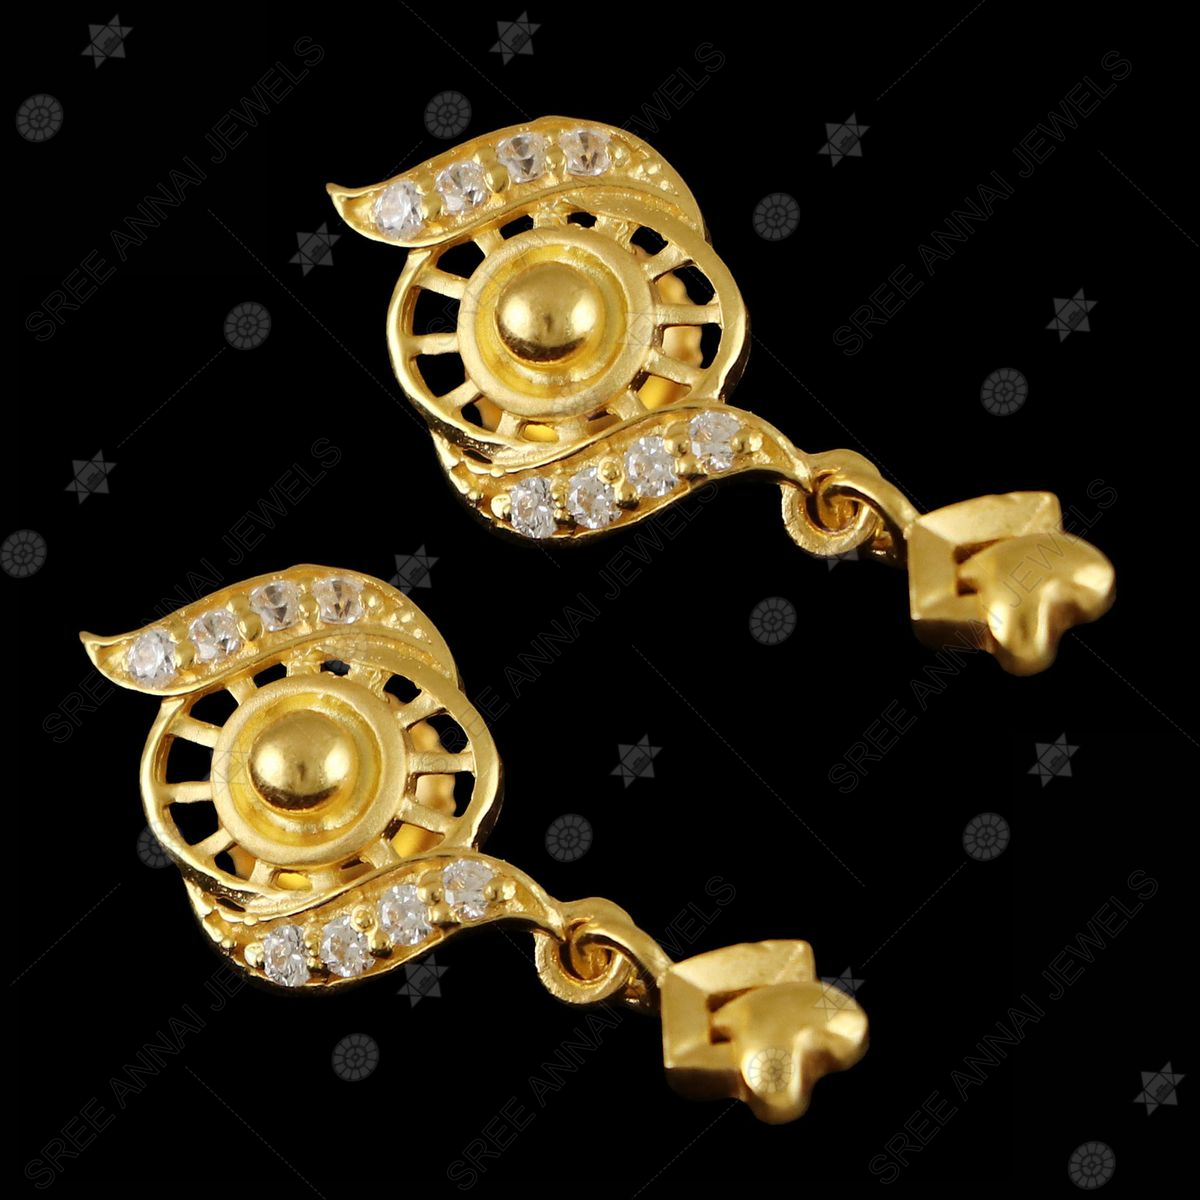 Buy quality Fancy Plain Gold Design in Ahmedabad